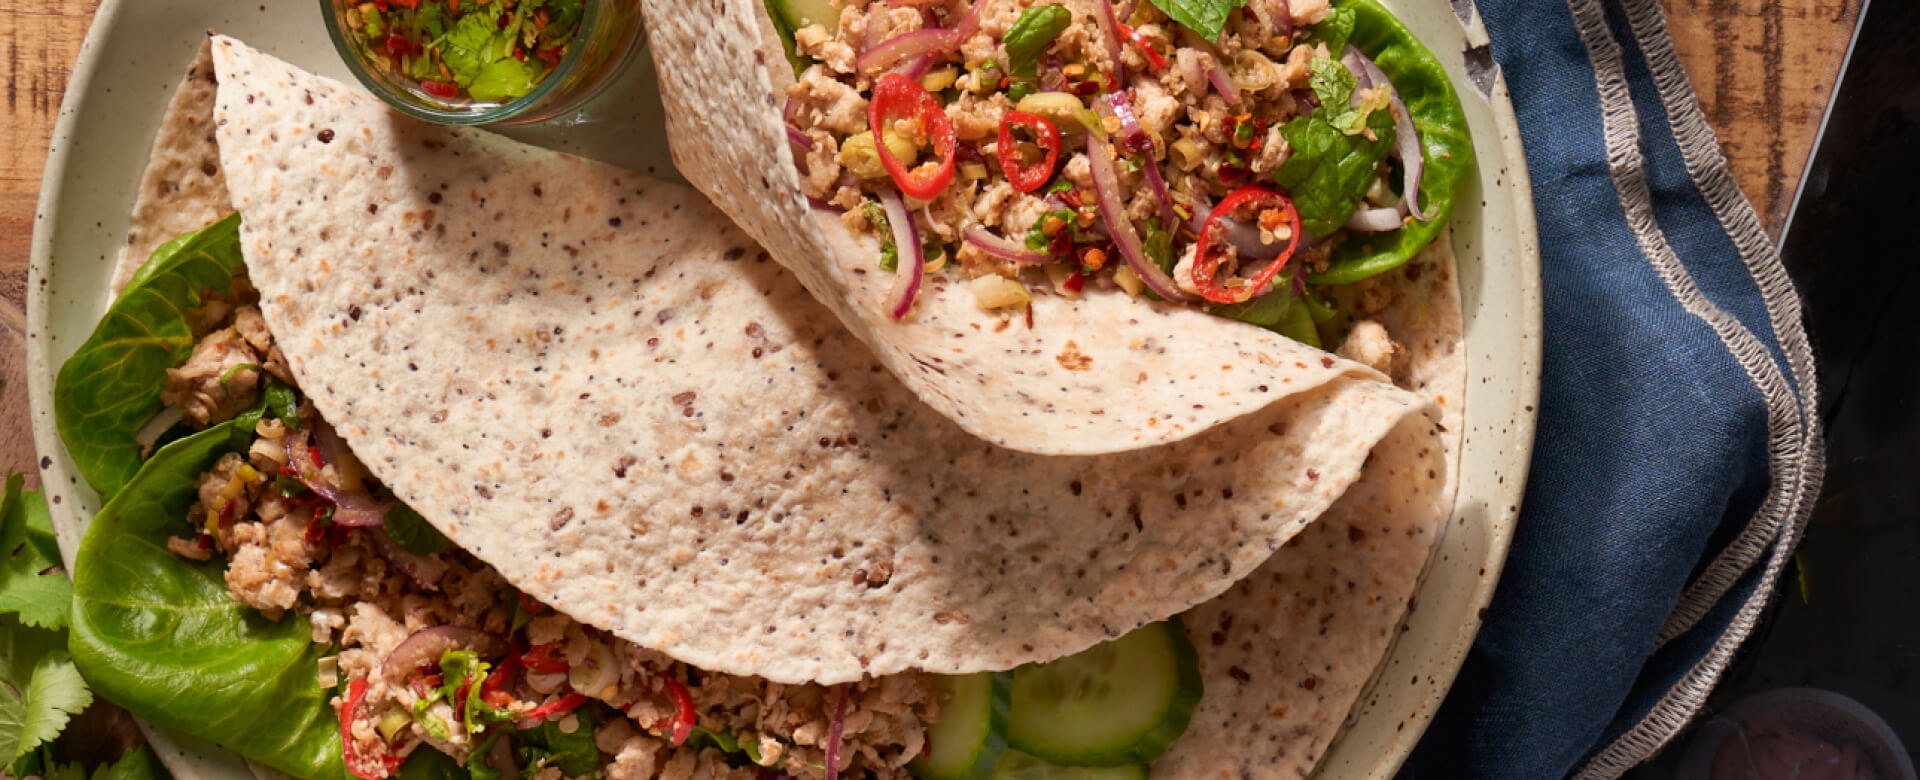 Press Release: Athletes, Nutritionists Eating Up New Low Carb Wraps